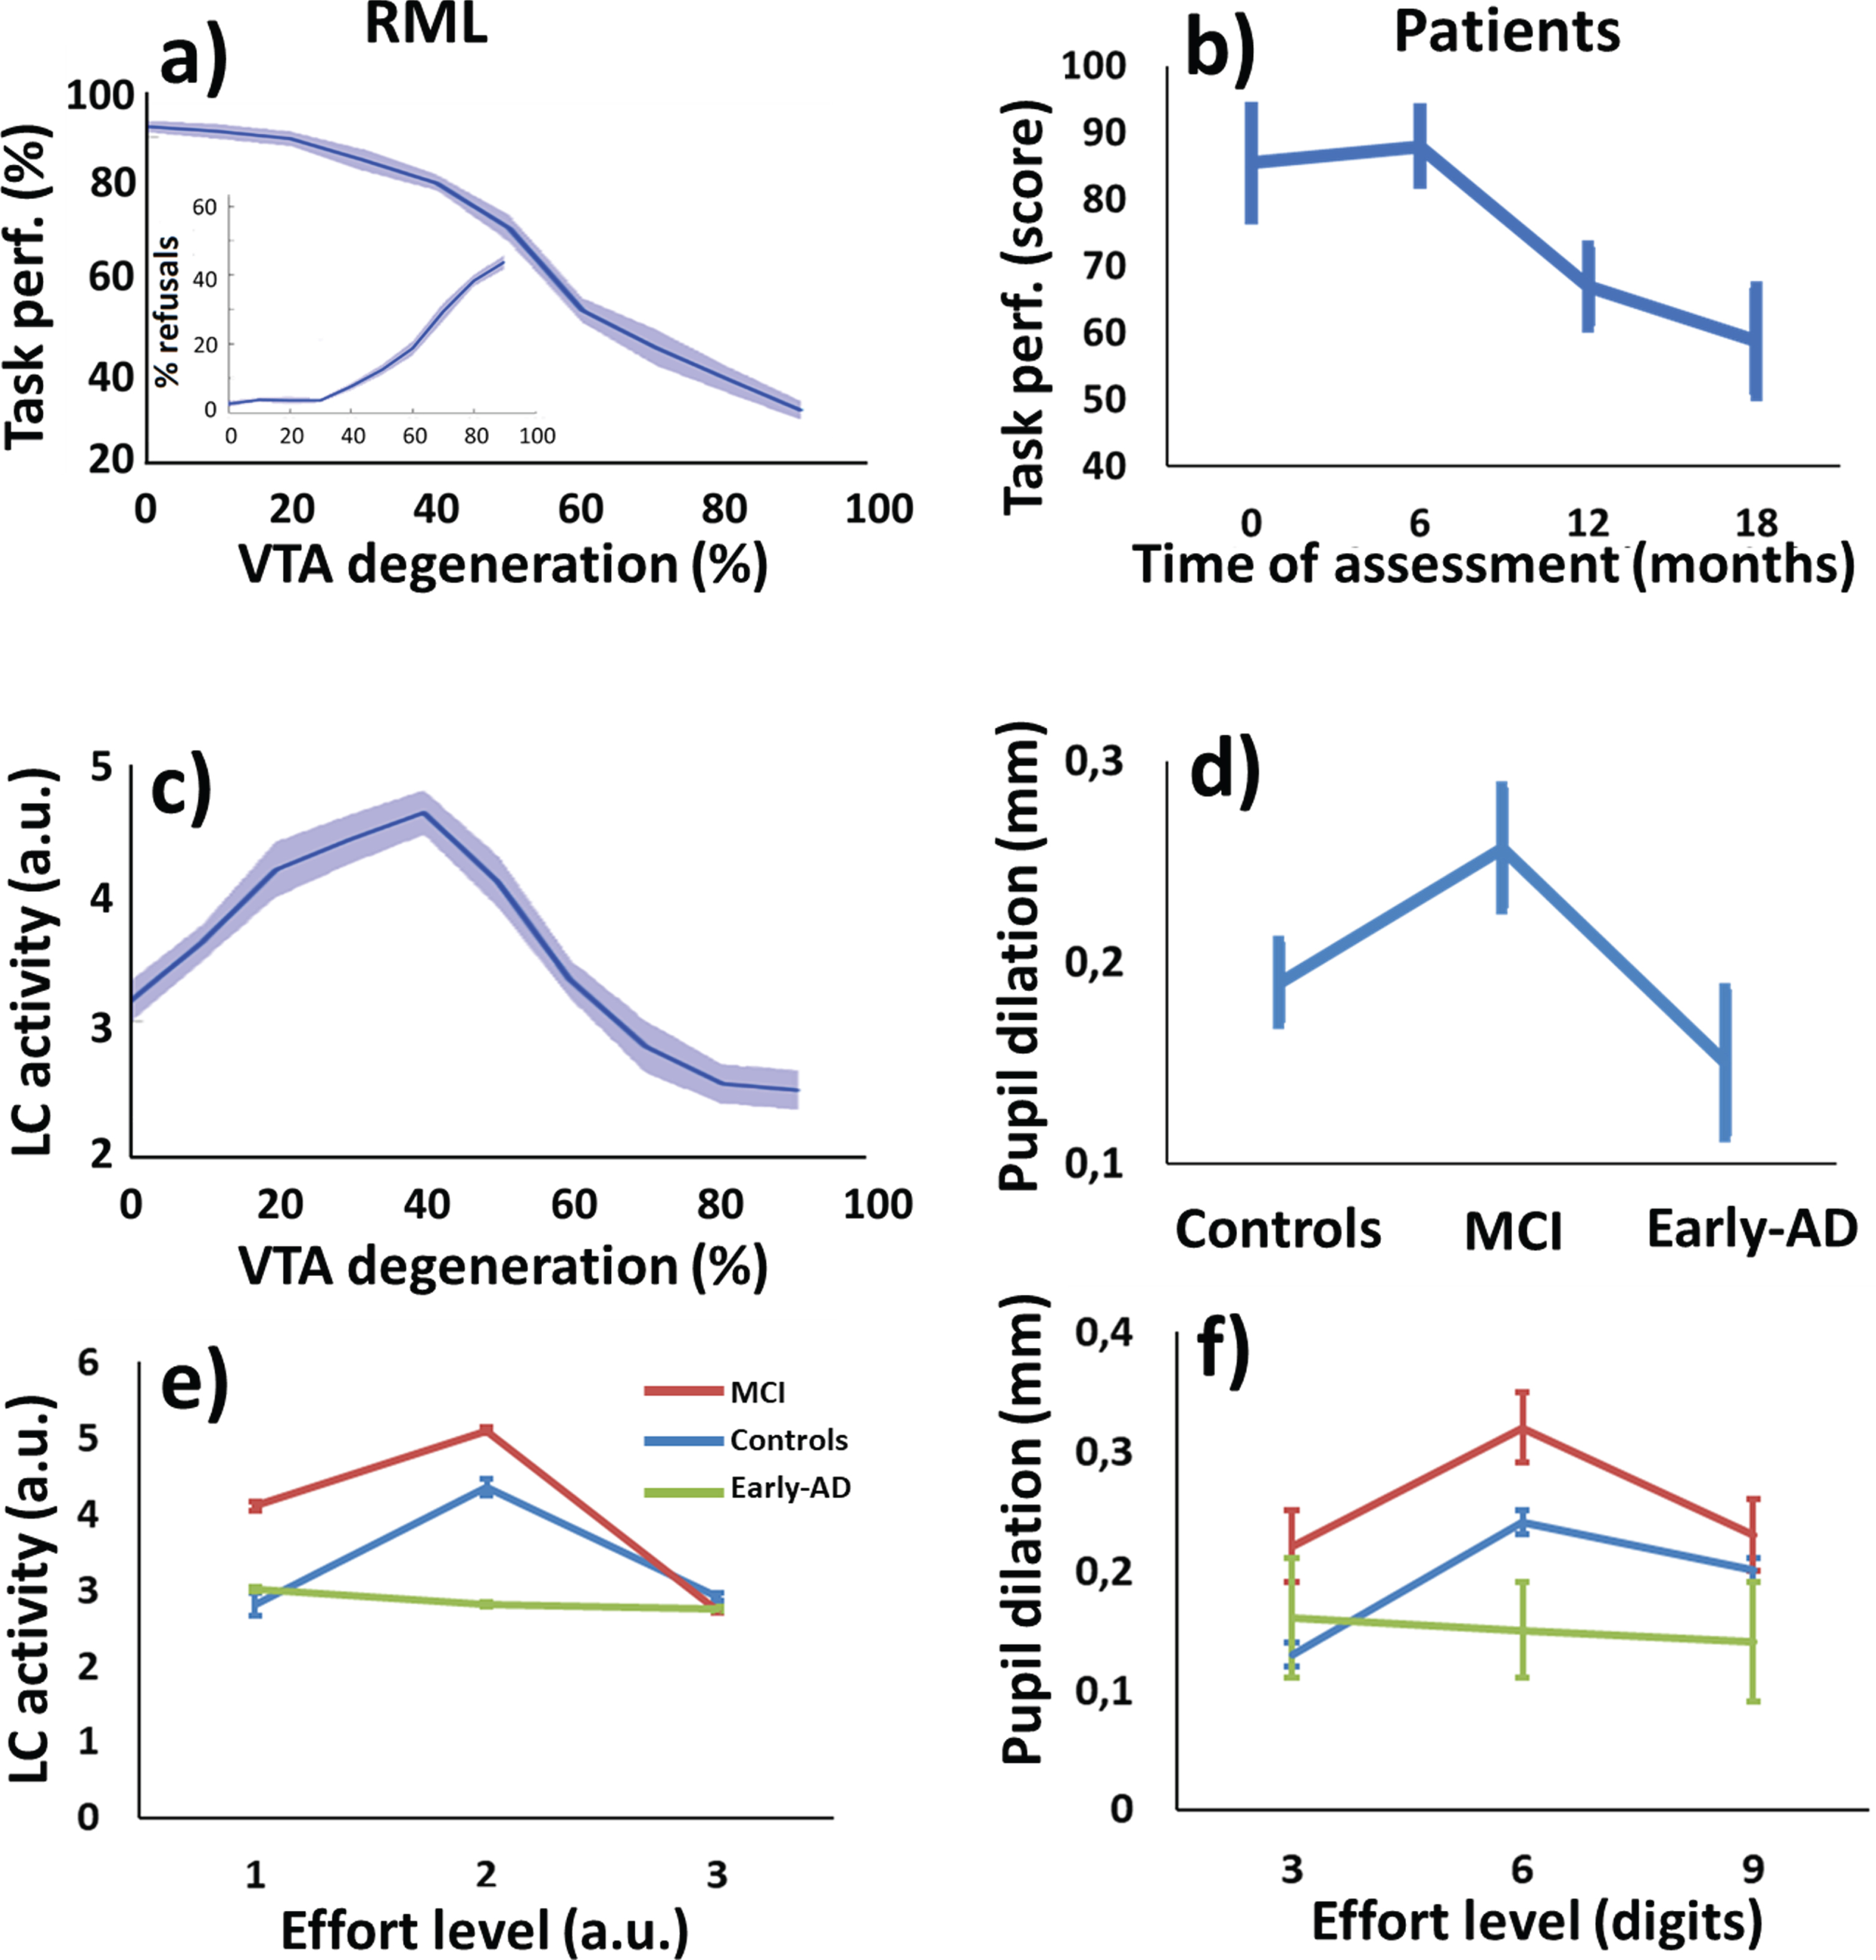 Model behaviour and neural dynamics (±s.e.m.) in the execution of the Effort Task as a function of a progressive VTA lesion (left column), and comparison with human data (right column). a) At the behavioral level, the percentage of simulated optimal choices (HR) first decreased slowly and then dropped abruptly with the VTA damage progression. The inner plot shows the percentage of “Stay” choices (refusal to engage in the task): this remained low during the early stages of VTA degeneration, and increased quickly afterwards. b) Behavioral performance of AD patients at different assessment time points. This is in agreement with the simulation in panel ‘a’ (data from [53]) where performance remains good during the early disease stages and then it drops quickly. c) At the neural level, simulated LC response (arbitrary units, a.u.) followed an inverted U shape when VTA was progressively lesioned. With low VTA damage, the dACCBoost module compensated by promoting catecholamine release. As LC was not lesioned, this resulted in an over-activation that compensated VTA degeneration and kept behavioral performance stable (a, b); with a more severe VTA lesion, the LC under-activated, leading to abrupt performance drop (a, b). d) The same pattern was found in patients with progressive cognitive impairment [55] (data averaged over the effort dimension from panel f; MCI, mild cognitive impairment). Pupil dilation is used as a proxy for LC activation, see main text). e) LC simulated activation as a function of task difficulty (number of digits), in three different simulated populations: controls, MCI, and Early-AD. f) Pupil dilation (a proxy of LC activity) as a function of task difficulty (number of digits), in human control and patient groups (data from [55]).